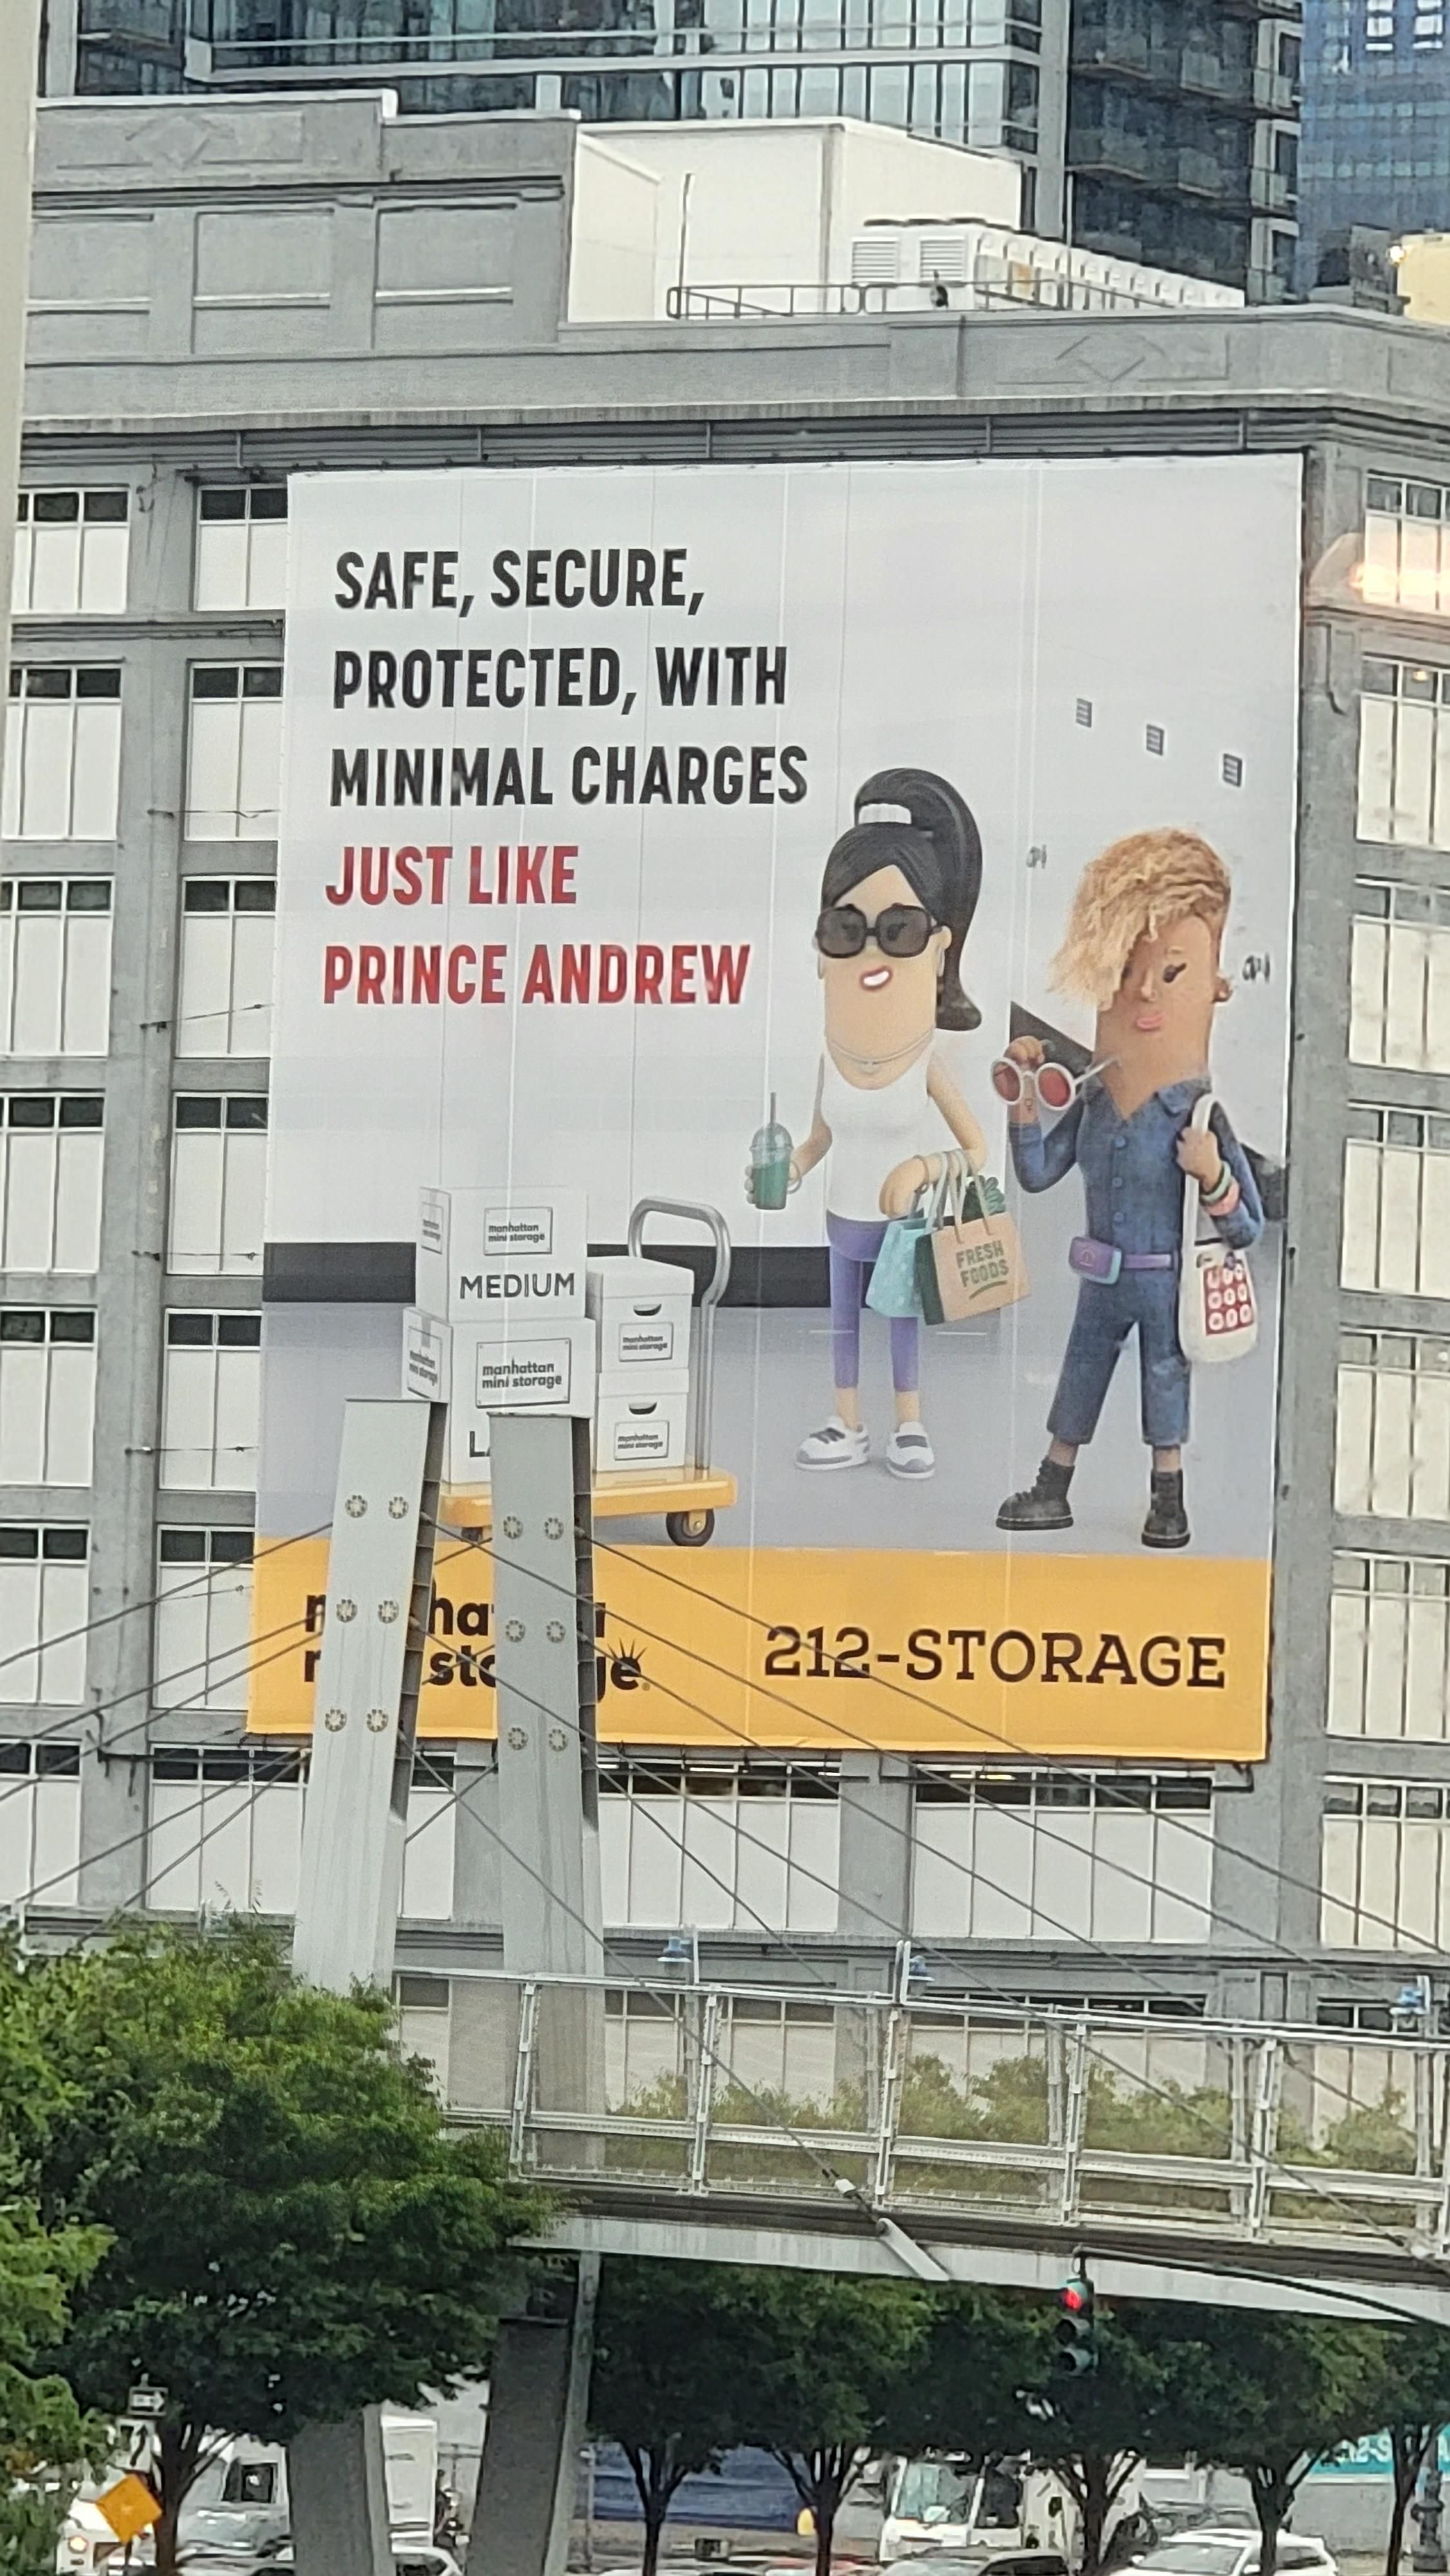 Manhattan Mini Storage really pulling no punches